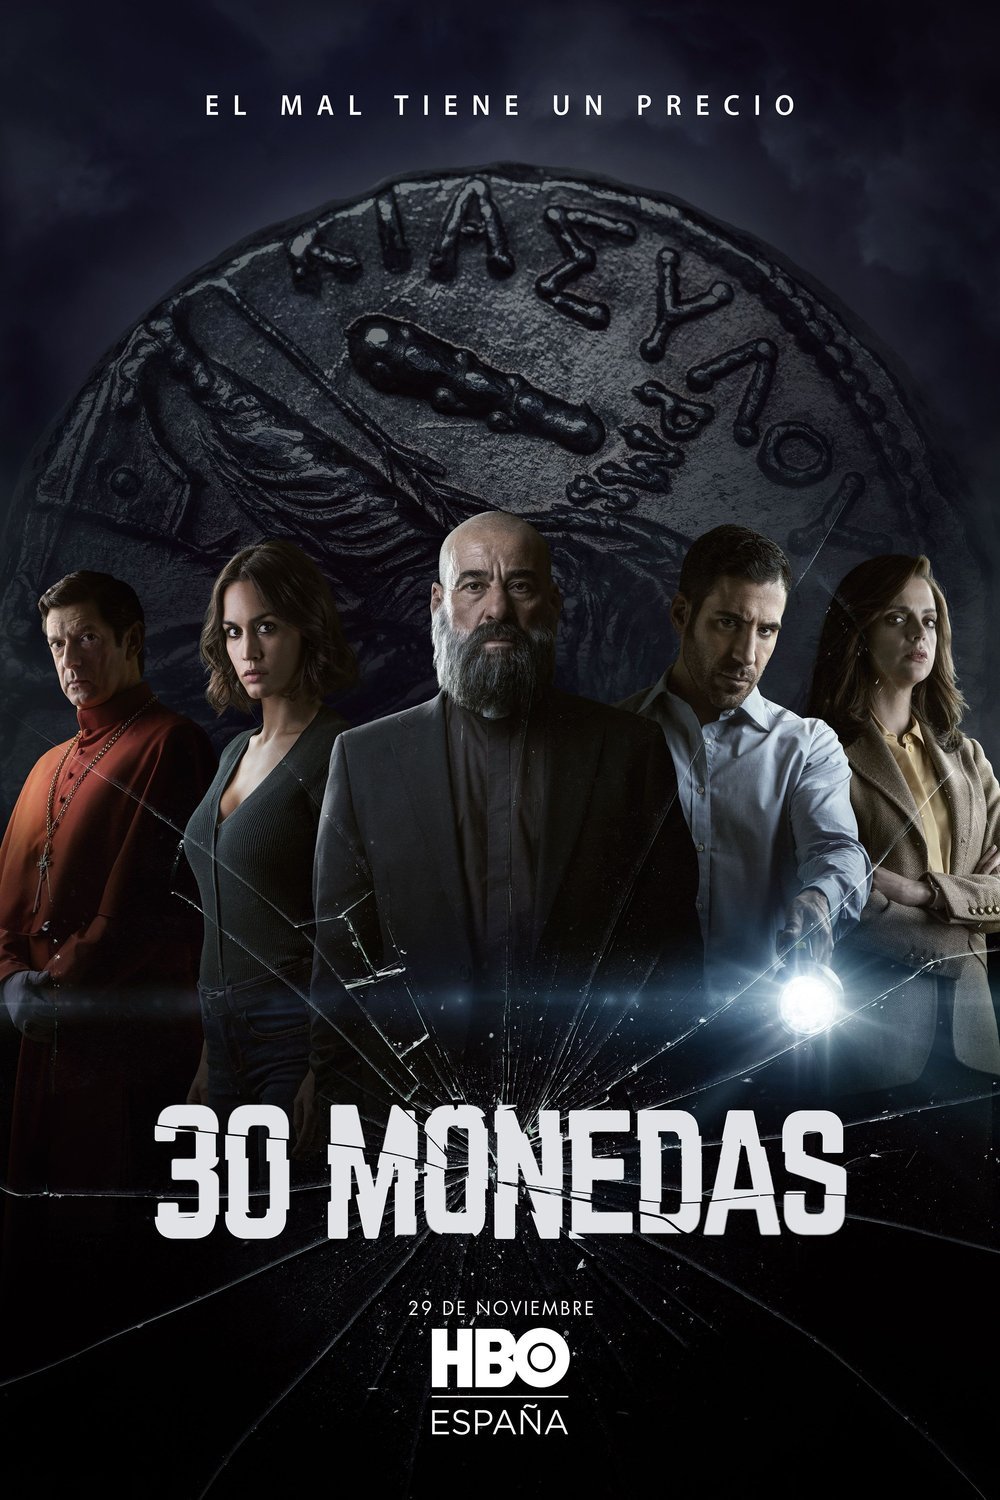 Spanish poster of the movie 30 Coins